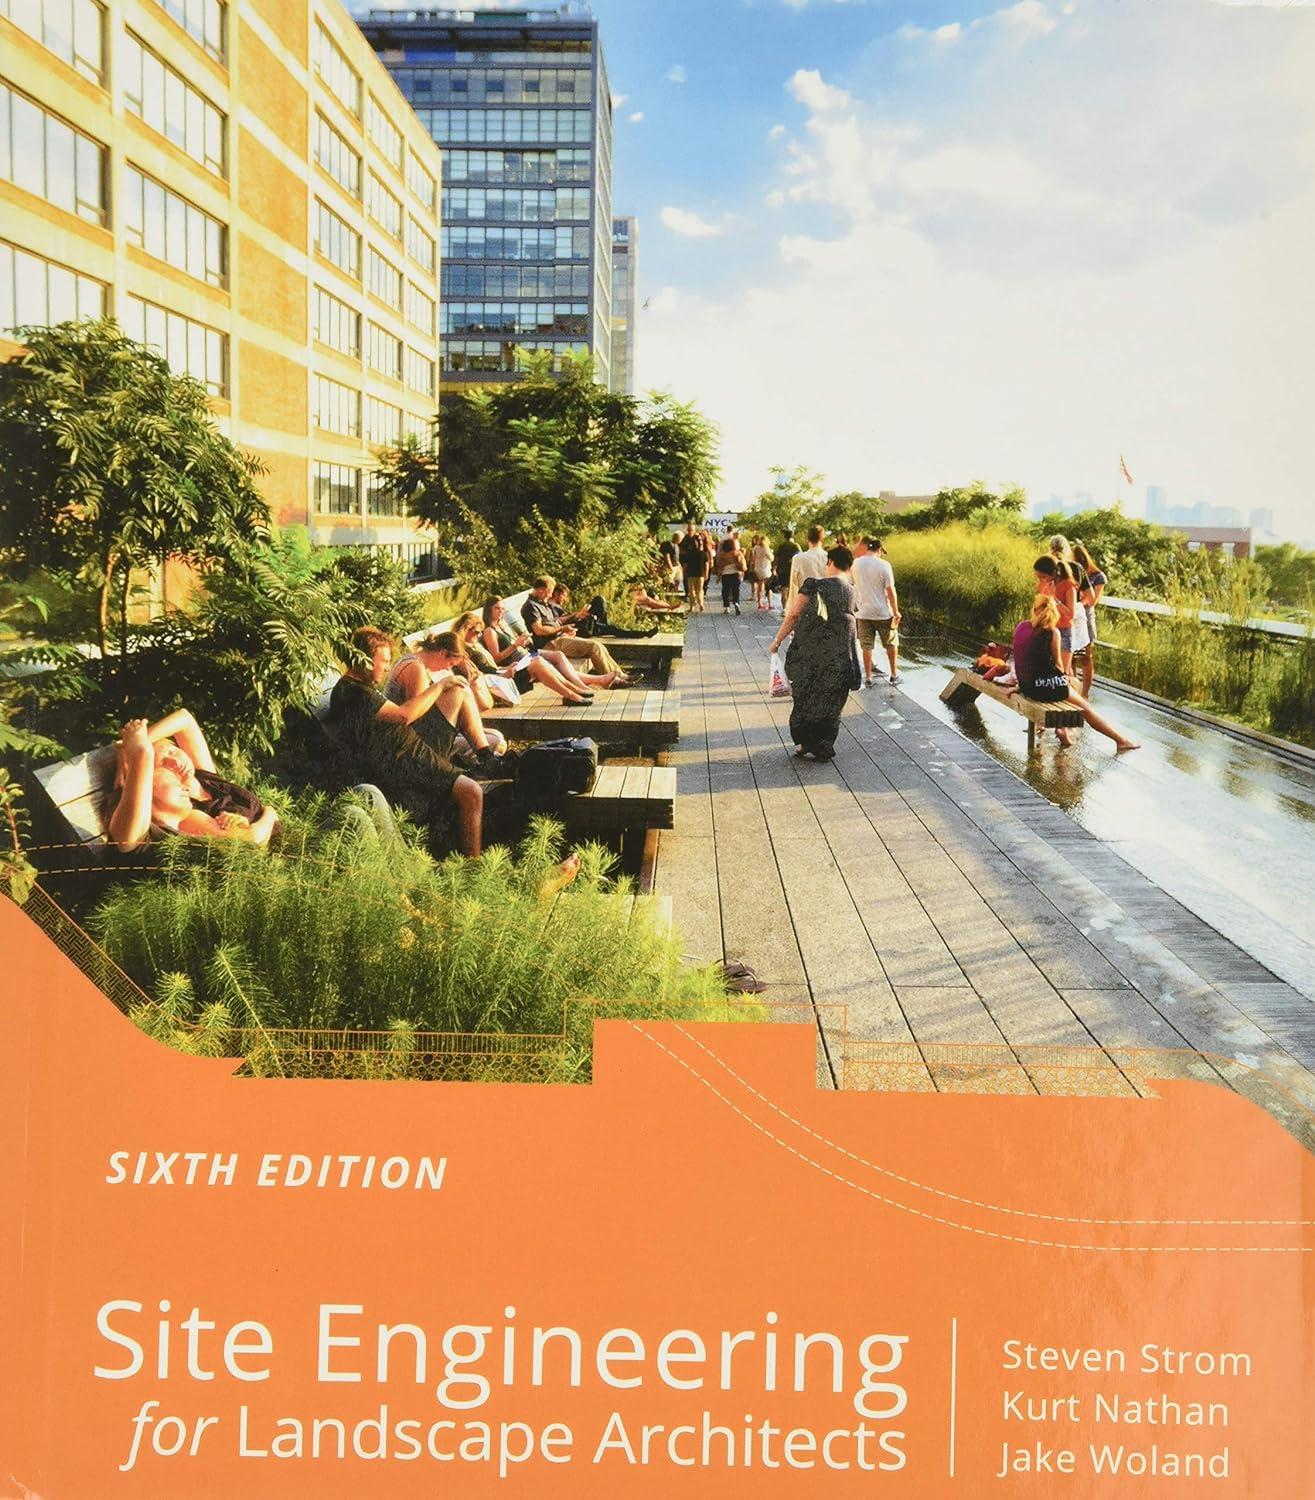 site engineering for landscape architects 6th edition steven strom, kurt nathan, jake woland 1118090861,